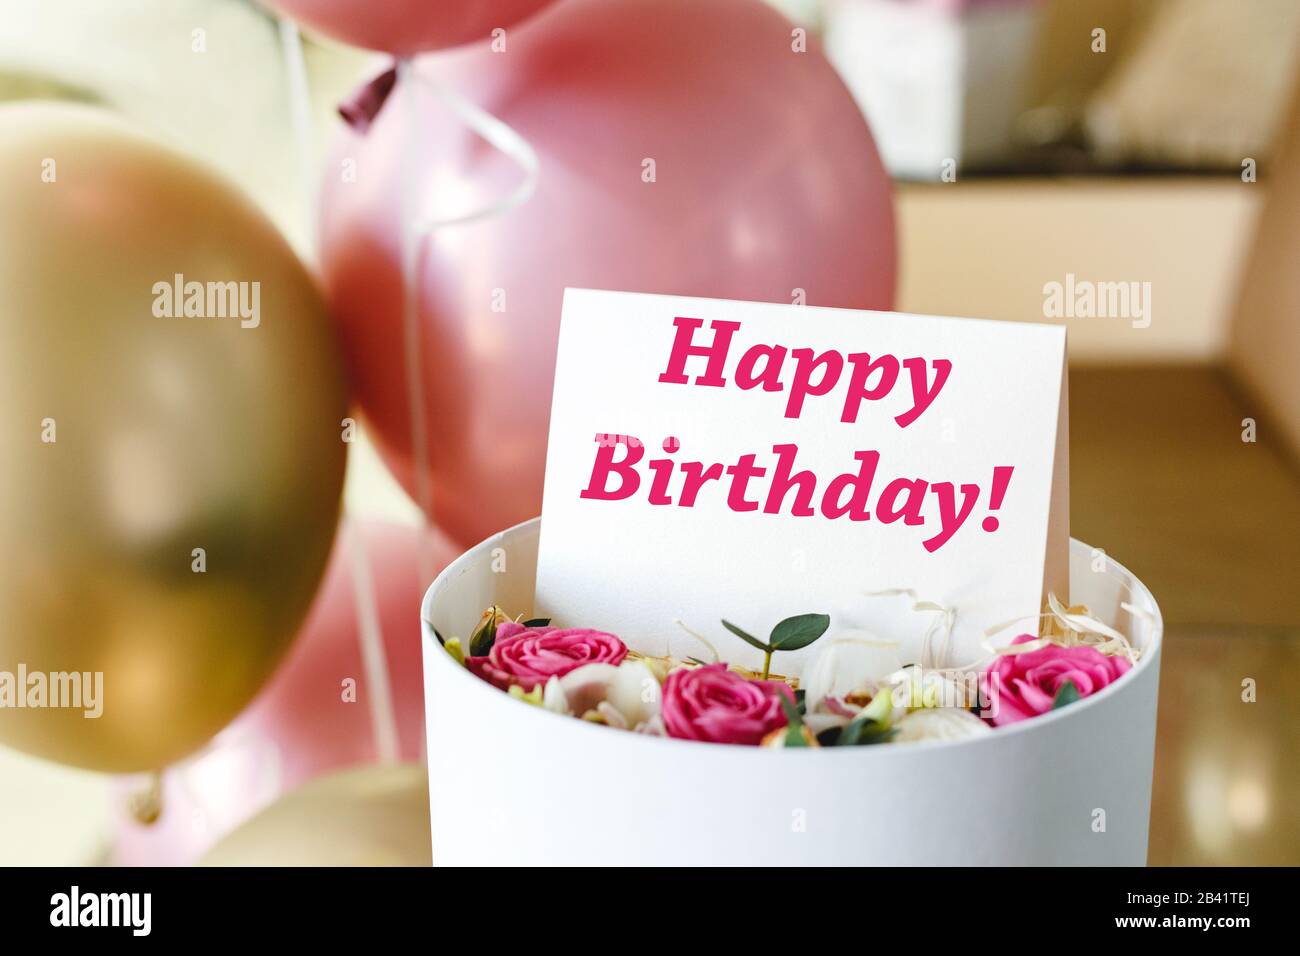 bouquet of colorful flowers with ribbon. happy birthday! card concept, Stock image